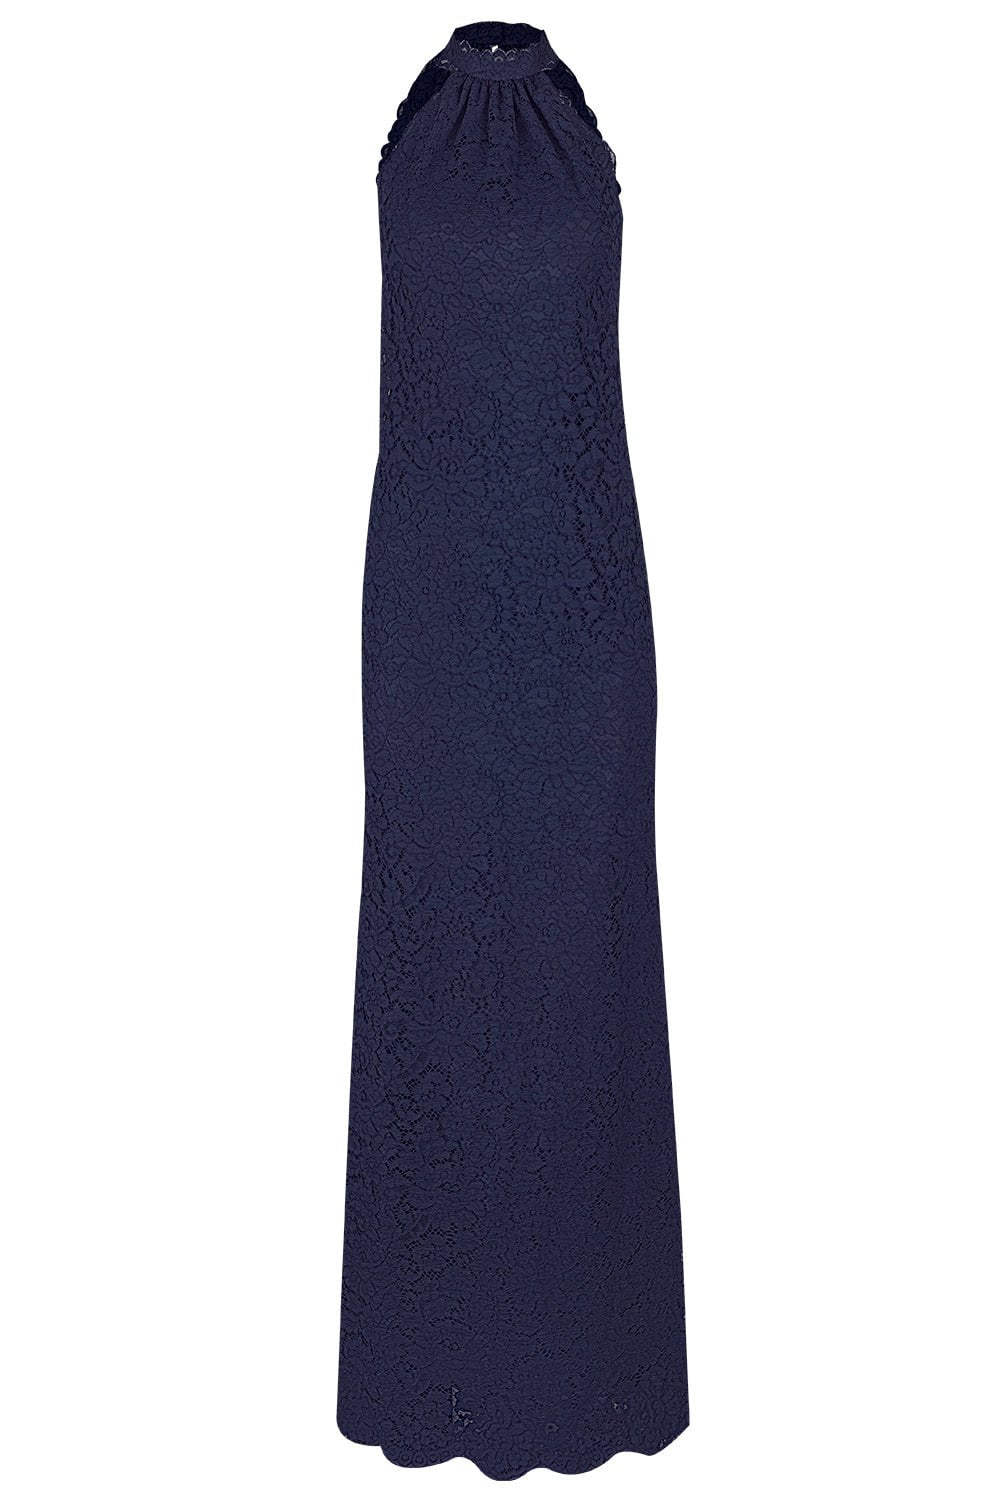 CATHERINE REGEHR-T Neck Lace Gown-NAVY